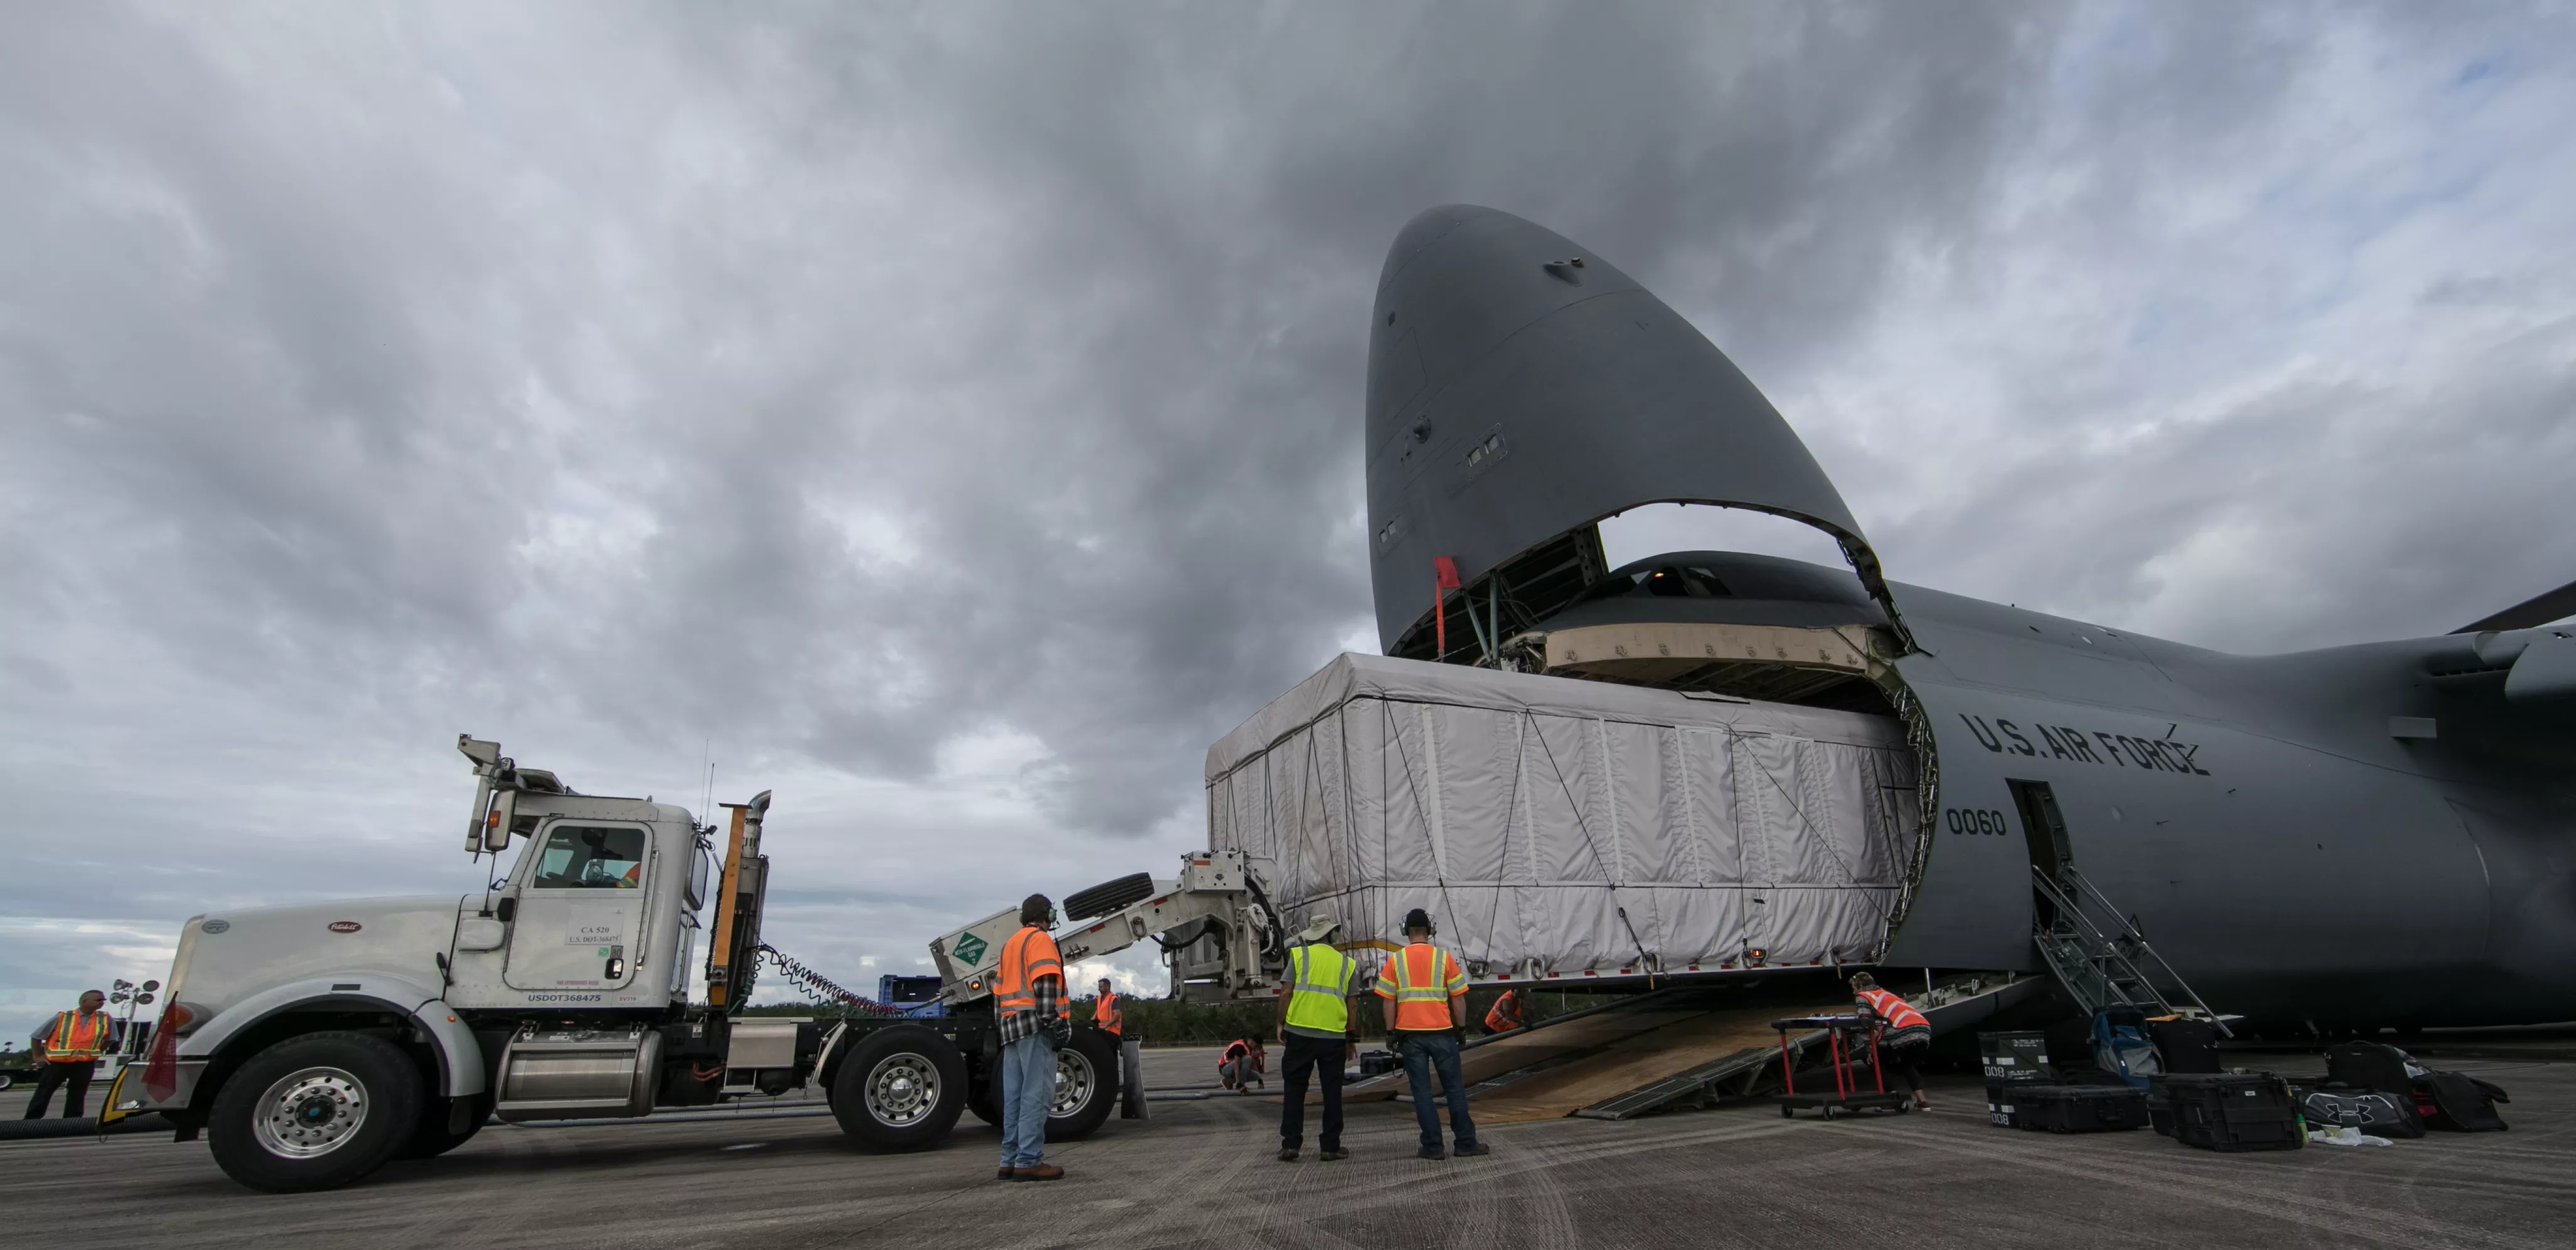 The GOES-S satellite arrives at Kennedy Space Center ahead of its March 2018 launch.